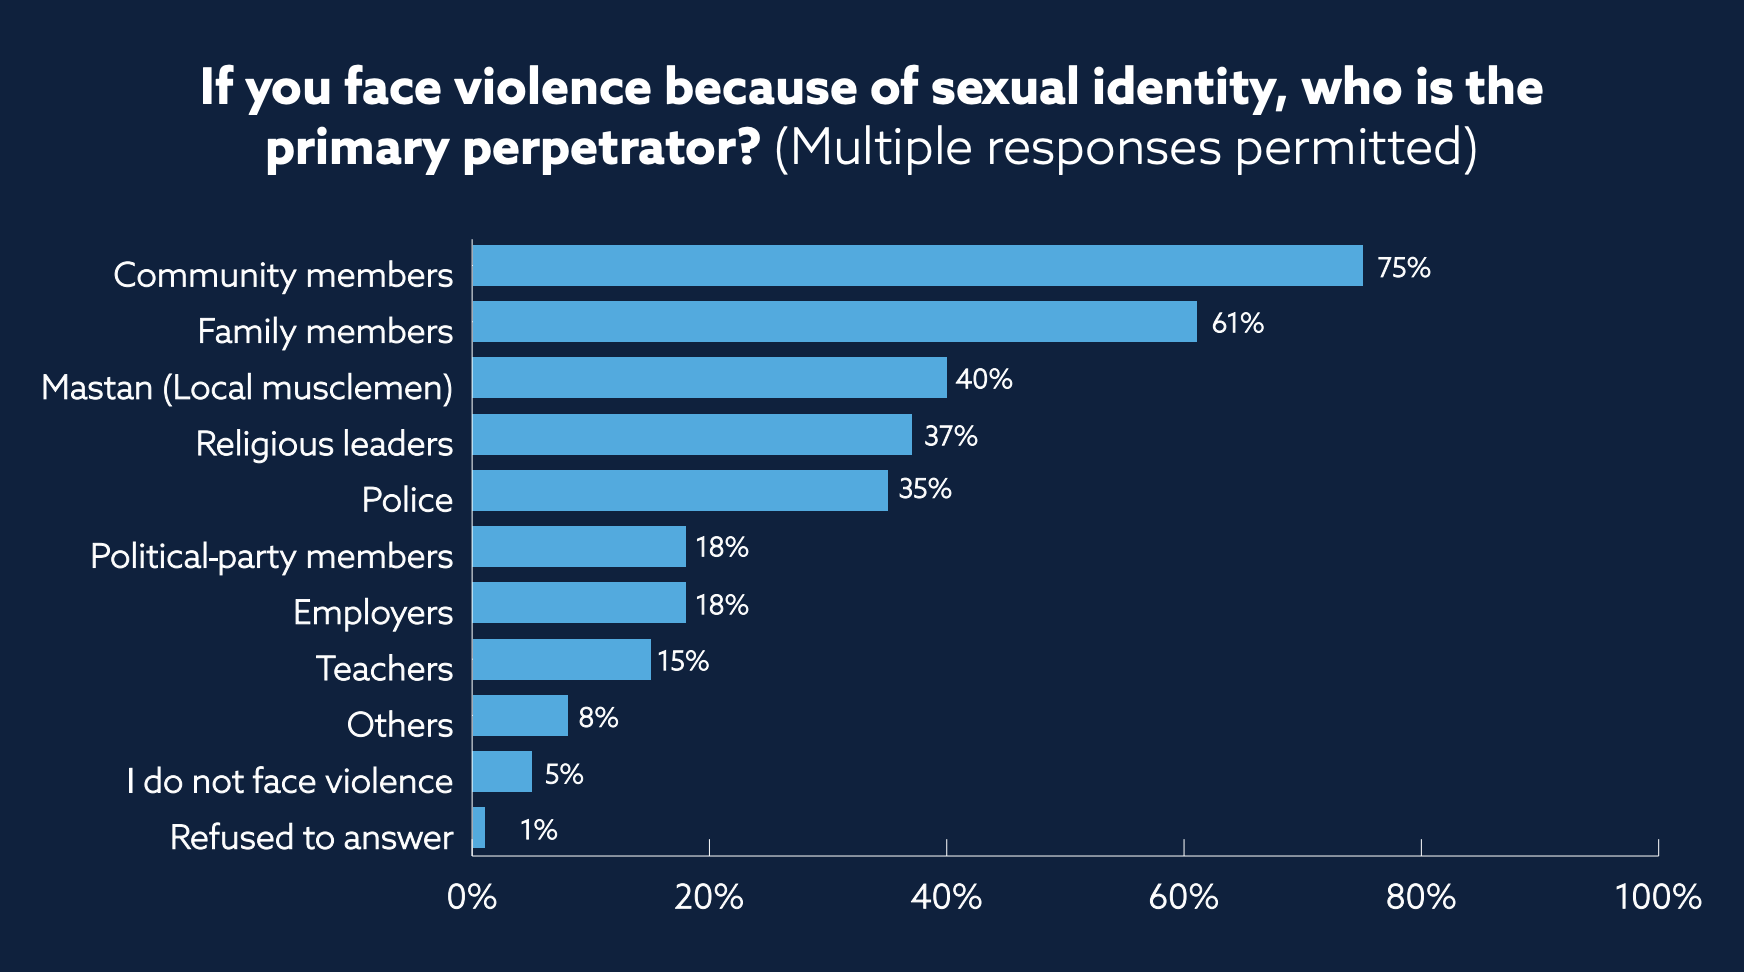 If you face violence because of sexual identity, who is the primary perpetrator? (Multiple responses permitted) A bar chart showing: Community members 75%; family members 61%; Mastan (local musclemen) 40%; religious leaders 37%; police 35%; political-party members 18%; employers 18%; teachers 15%; others 8%; I do not face violence 5%; refused to answer 1%.